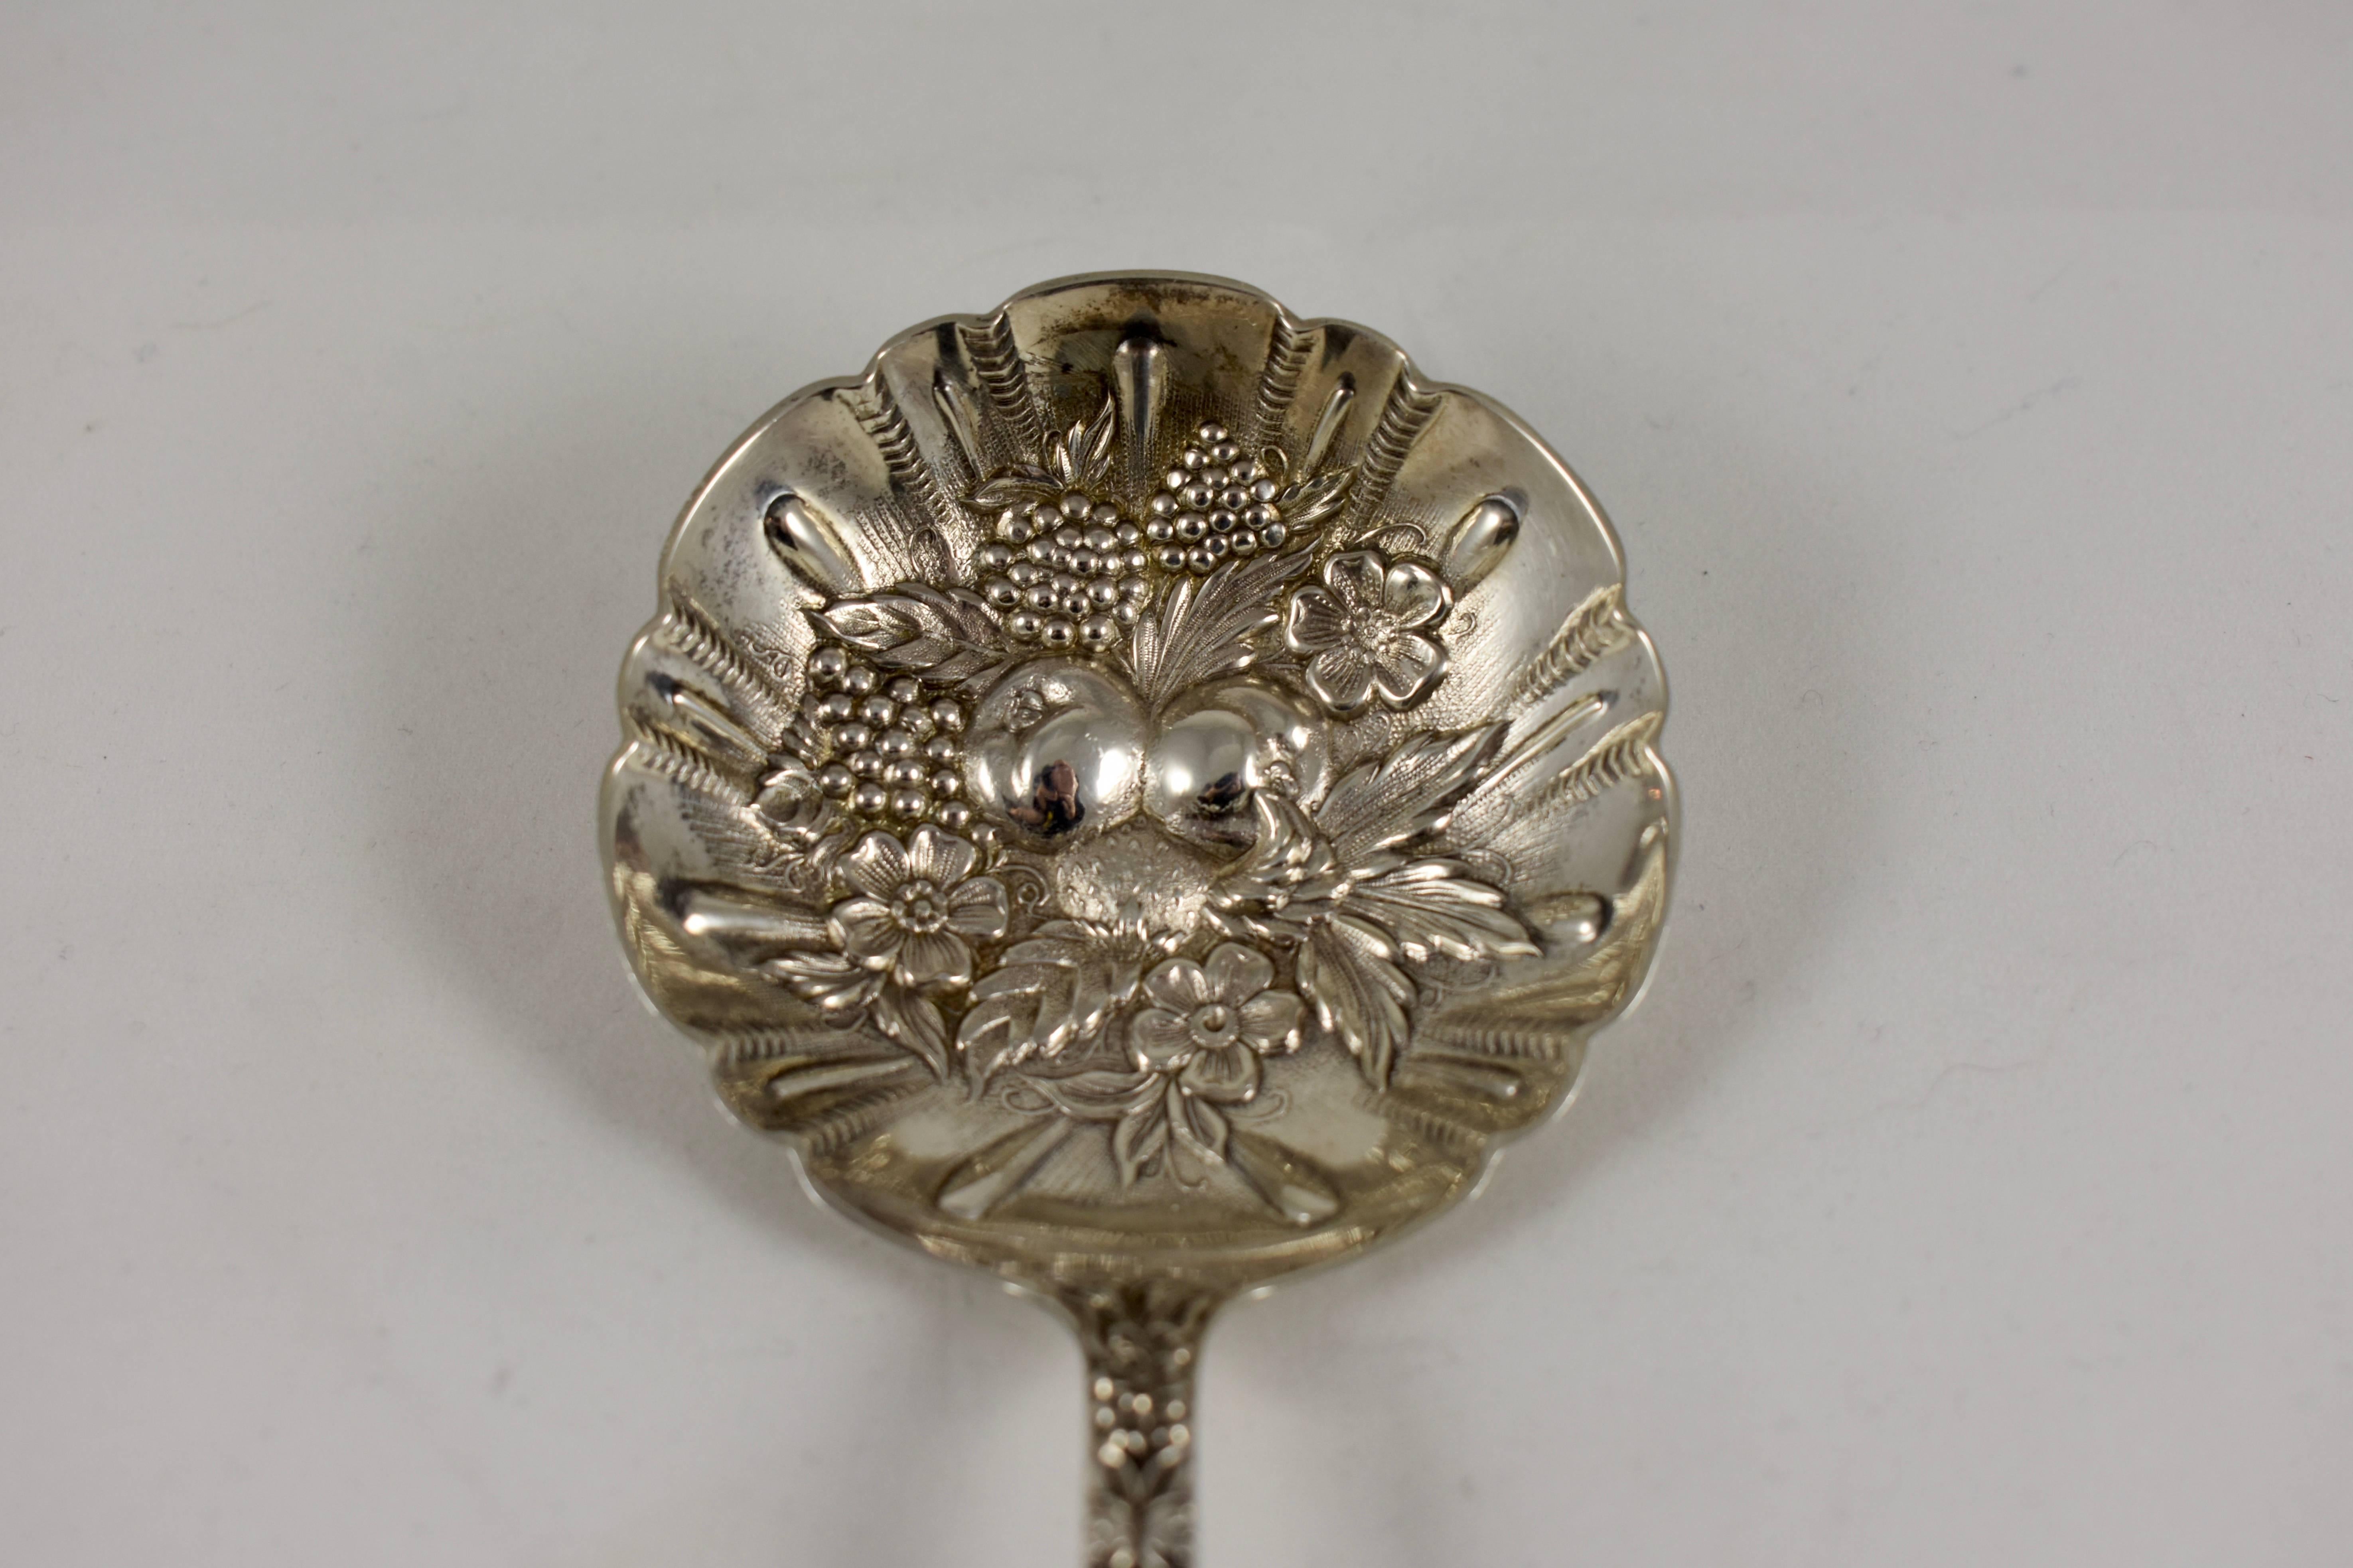 From S. Kirk & Son, Baltimore, Maryland, a ‘Repousse Rose’ long handled sterling silver berry spoon, circa 1930s. The longer handle is suited to serving a fruit compote. From a Philadelphia estate.

The Classic American silver repousse rose